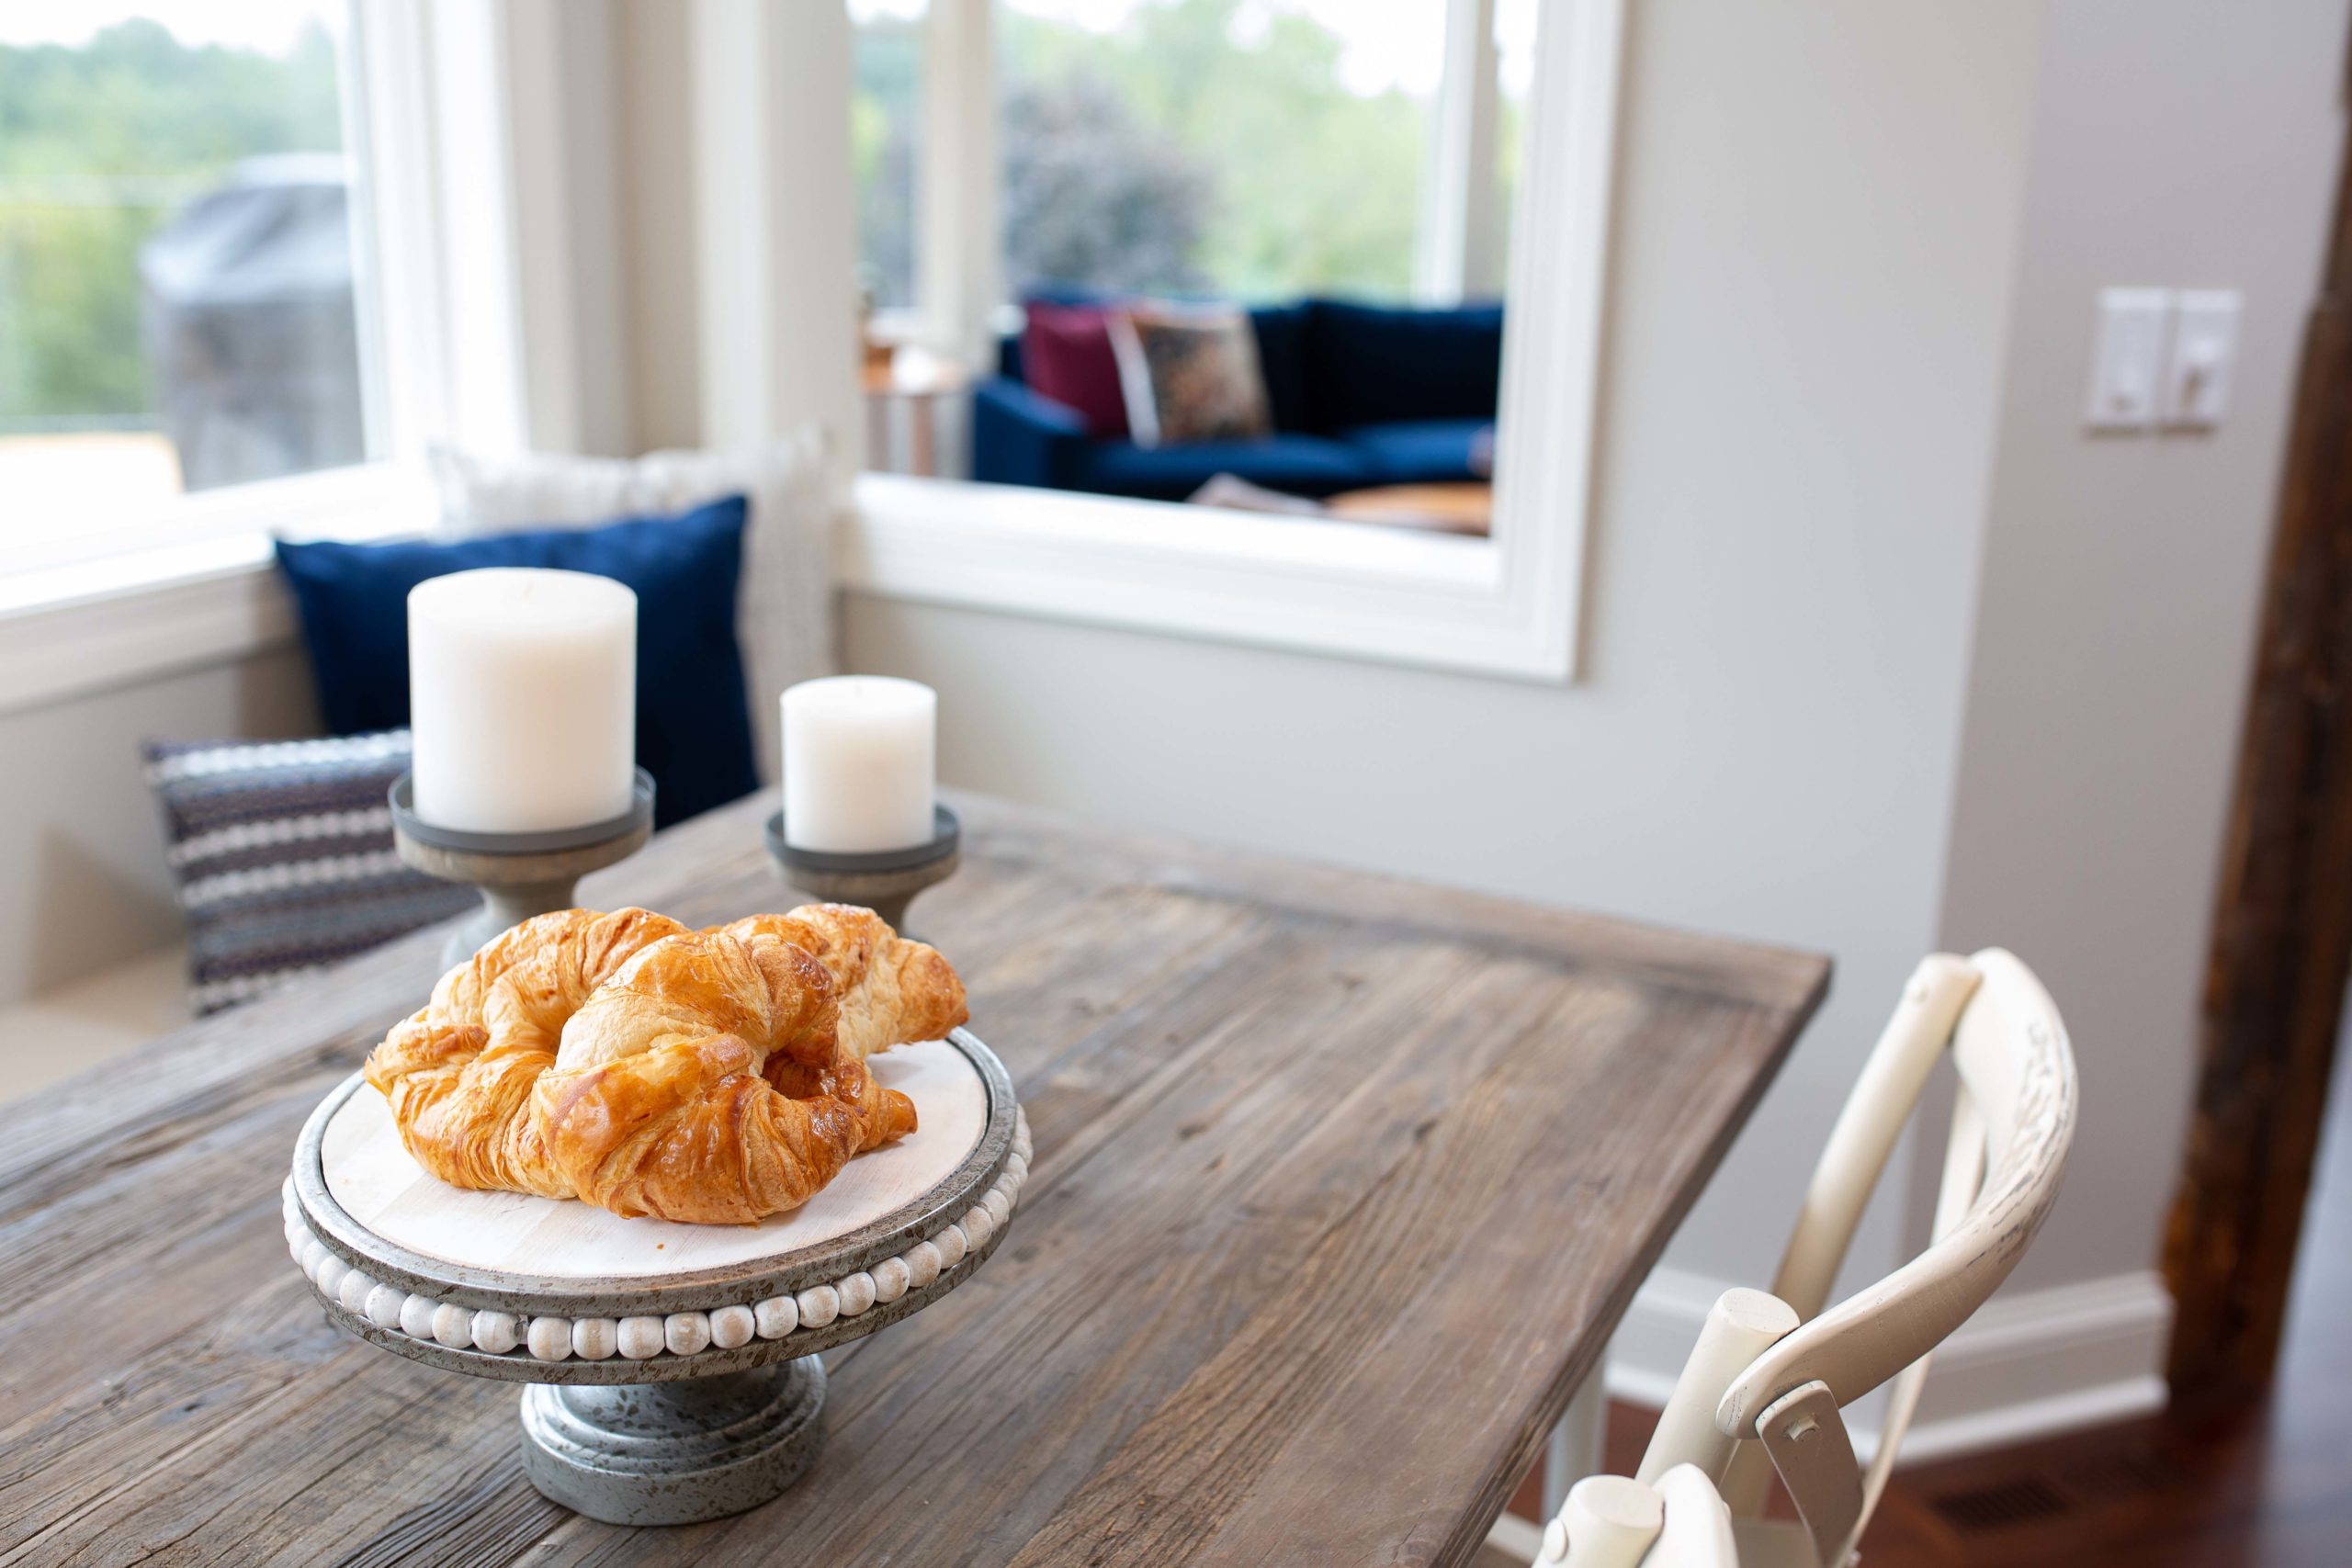 A plate of croissants on a table in front of a window.